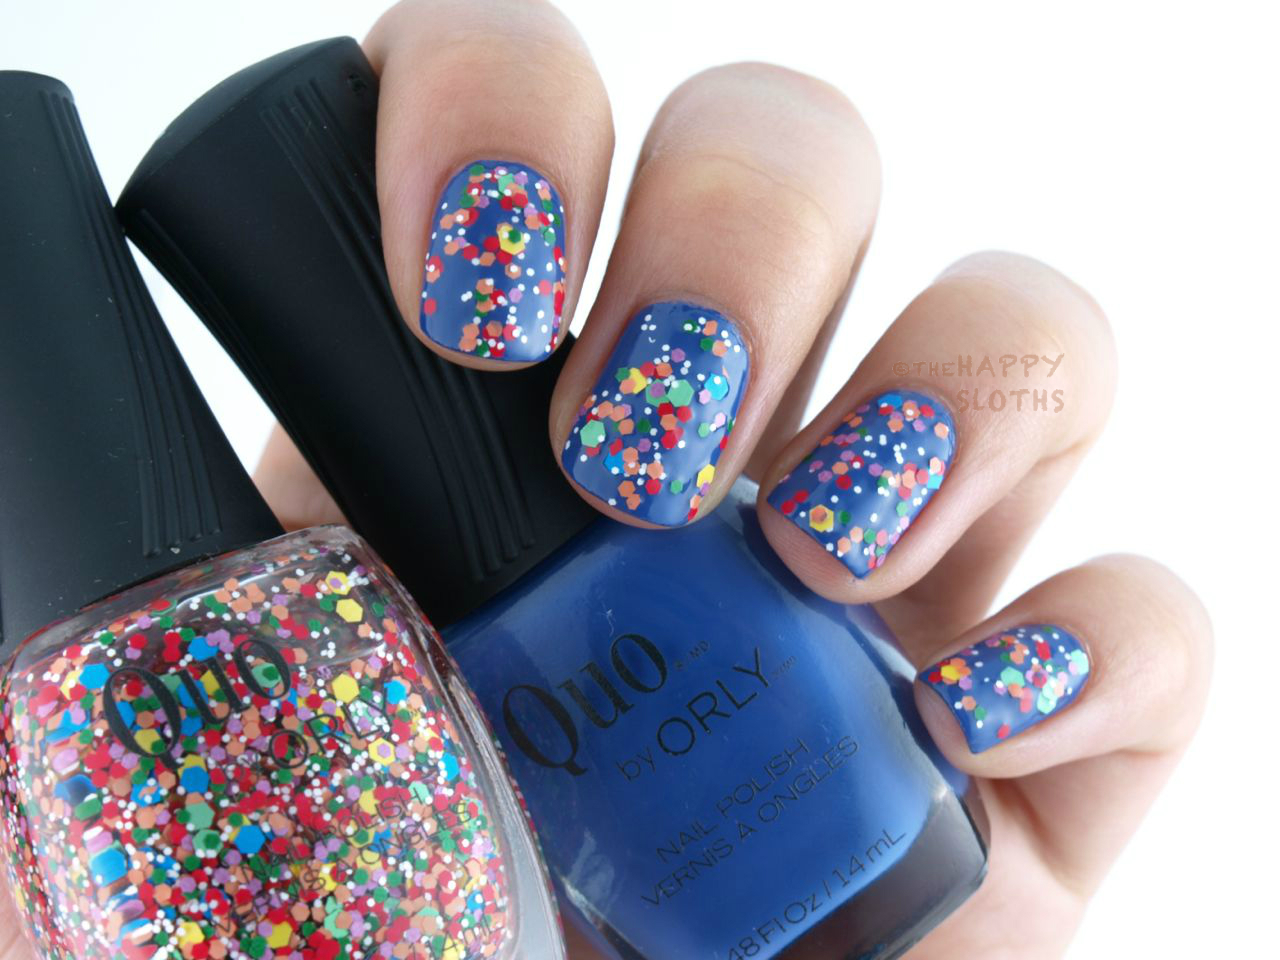 Quo by Orly Fall 2015 Dance Party Collection: "Blue Beat" & "Epic Remix"